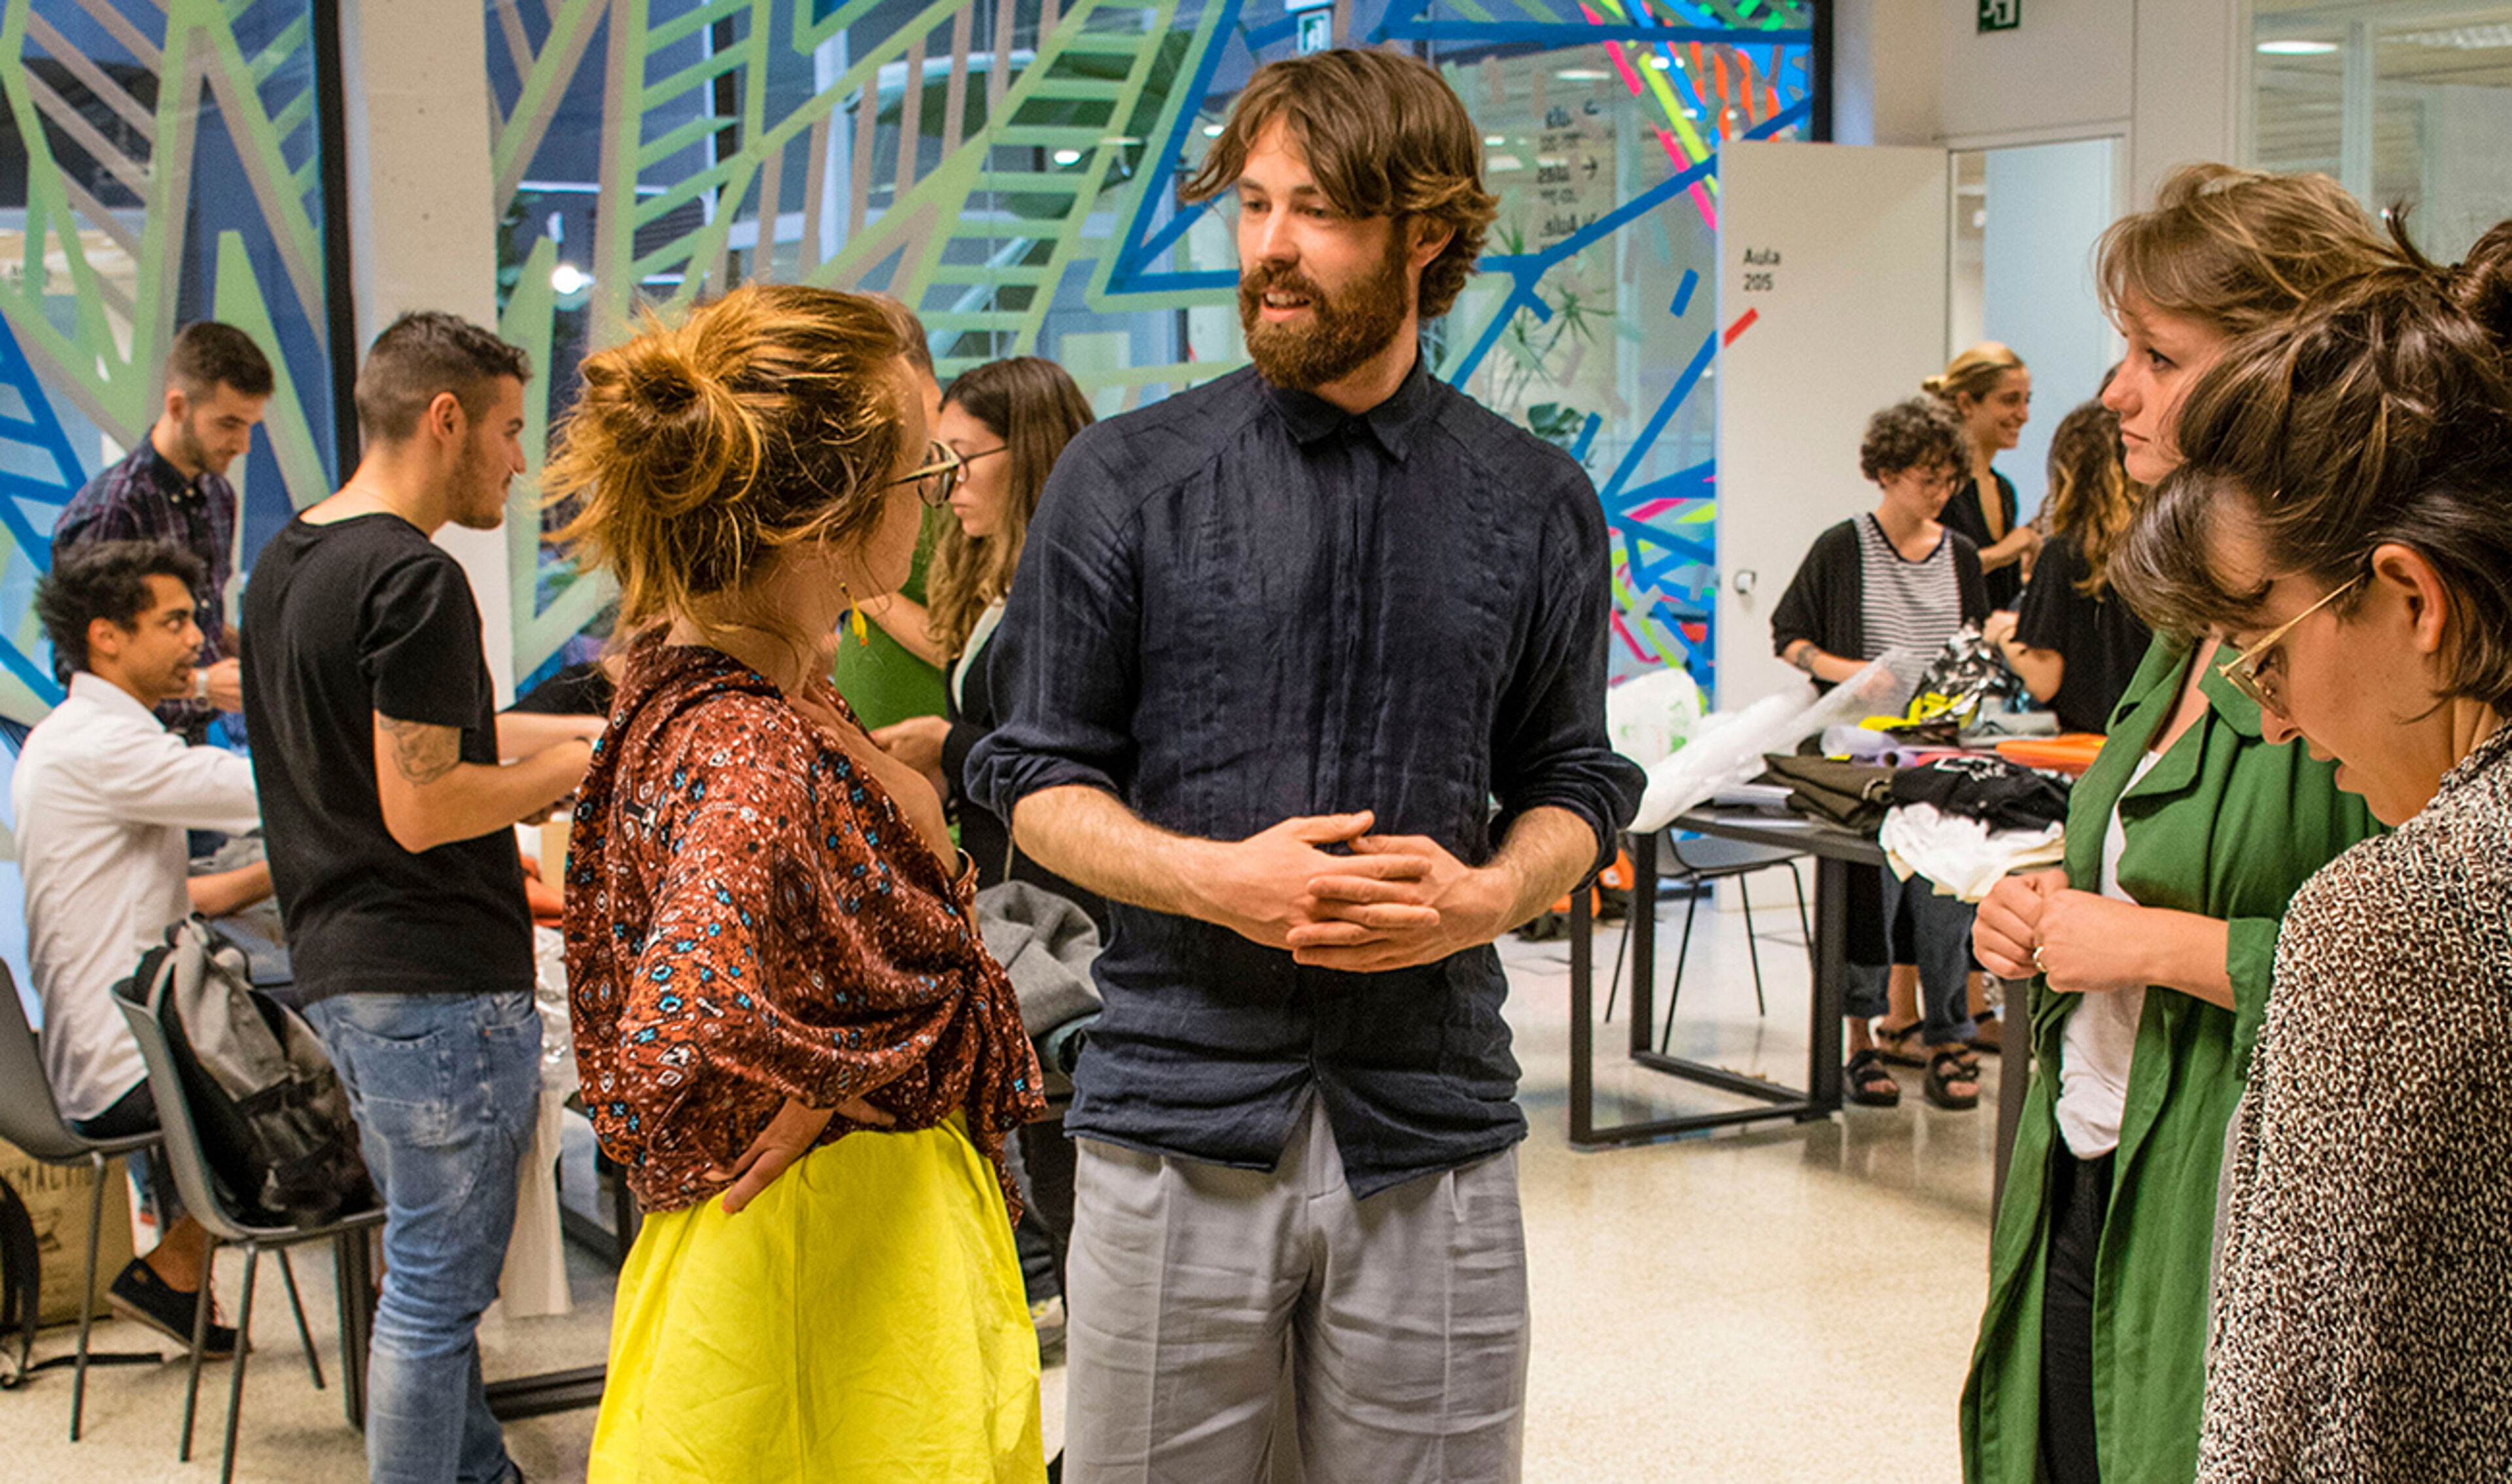 A group of individuals engaged in conversation at a creative workshop with vibrant artwork in the background.